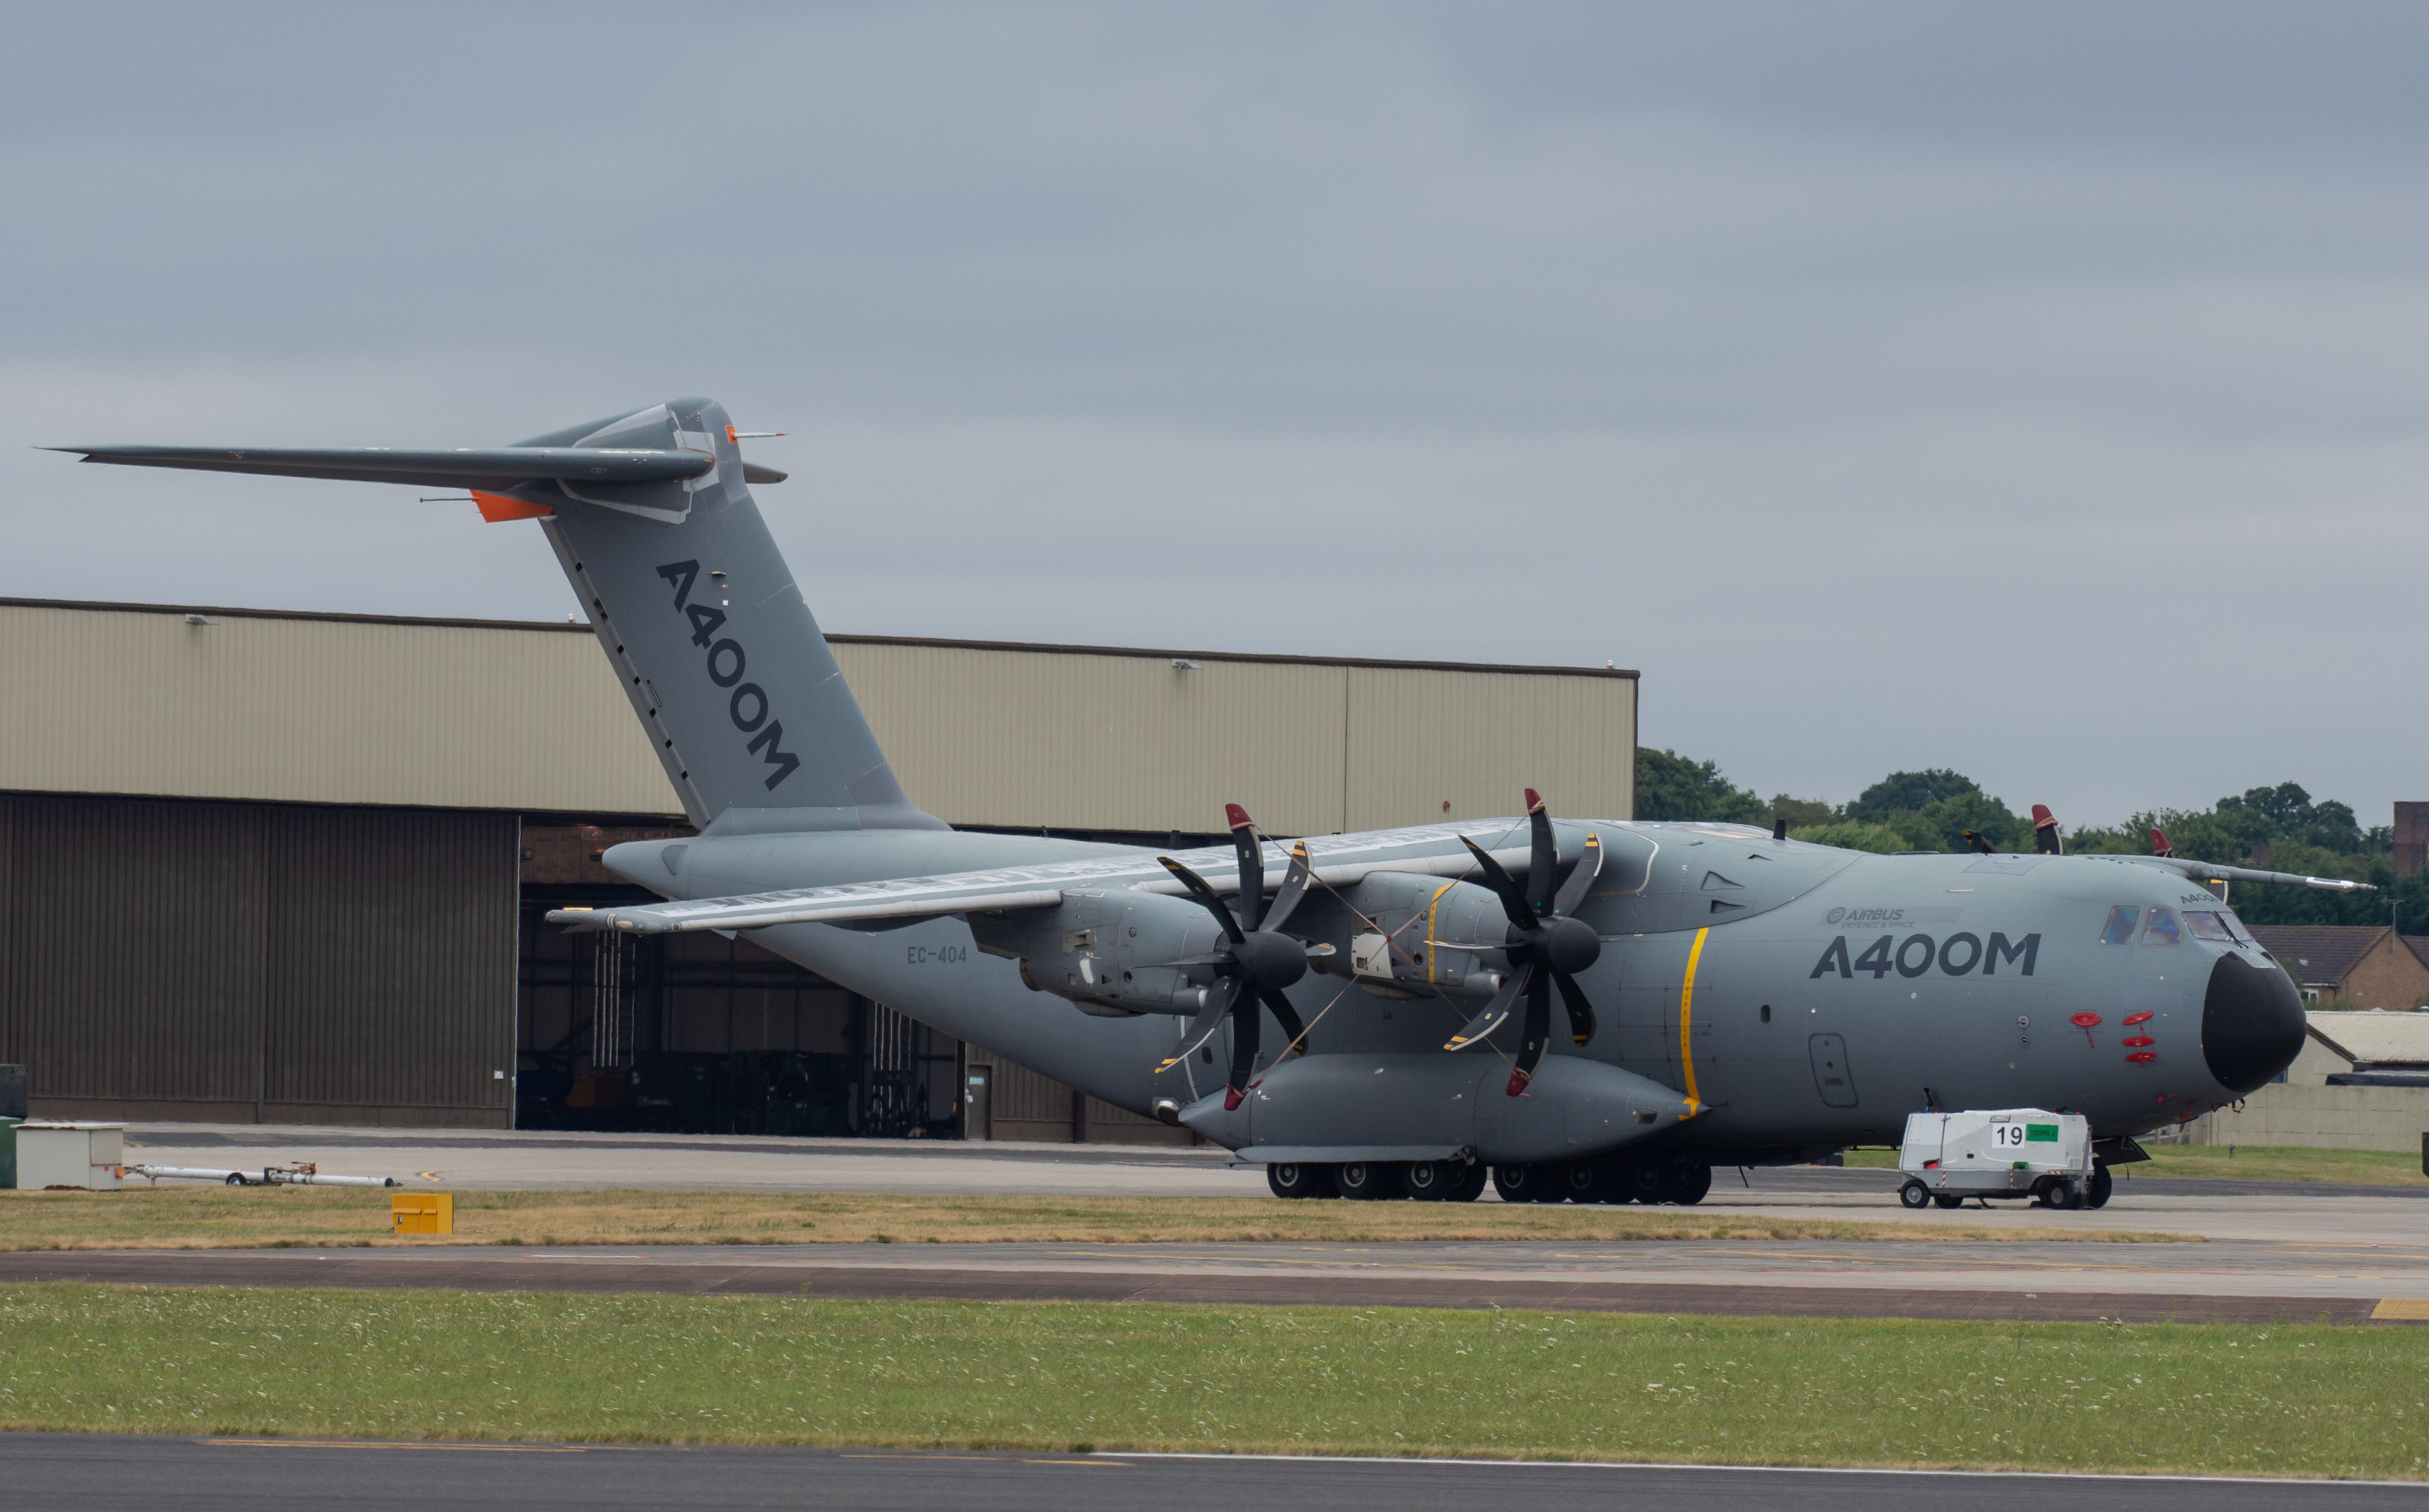 EC-404/EC404 Airbus Industrie Airbus A400M Airframe Information - AVSpotters.com